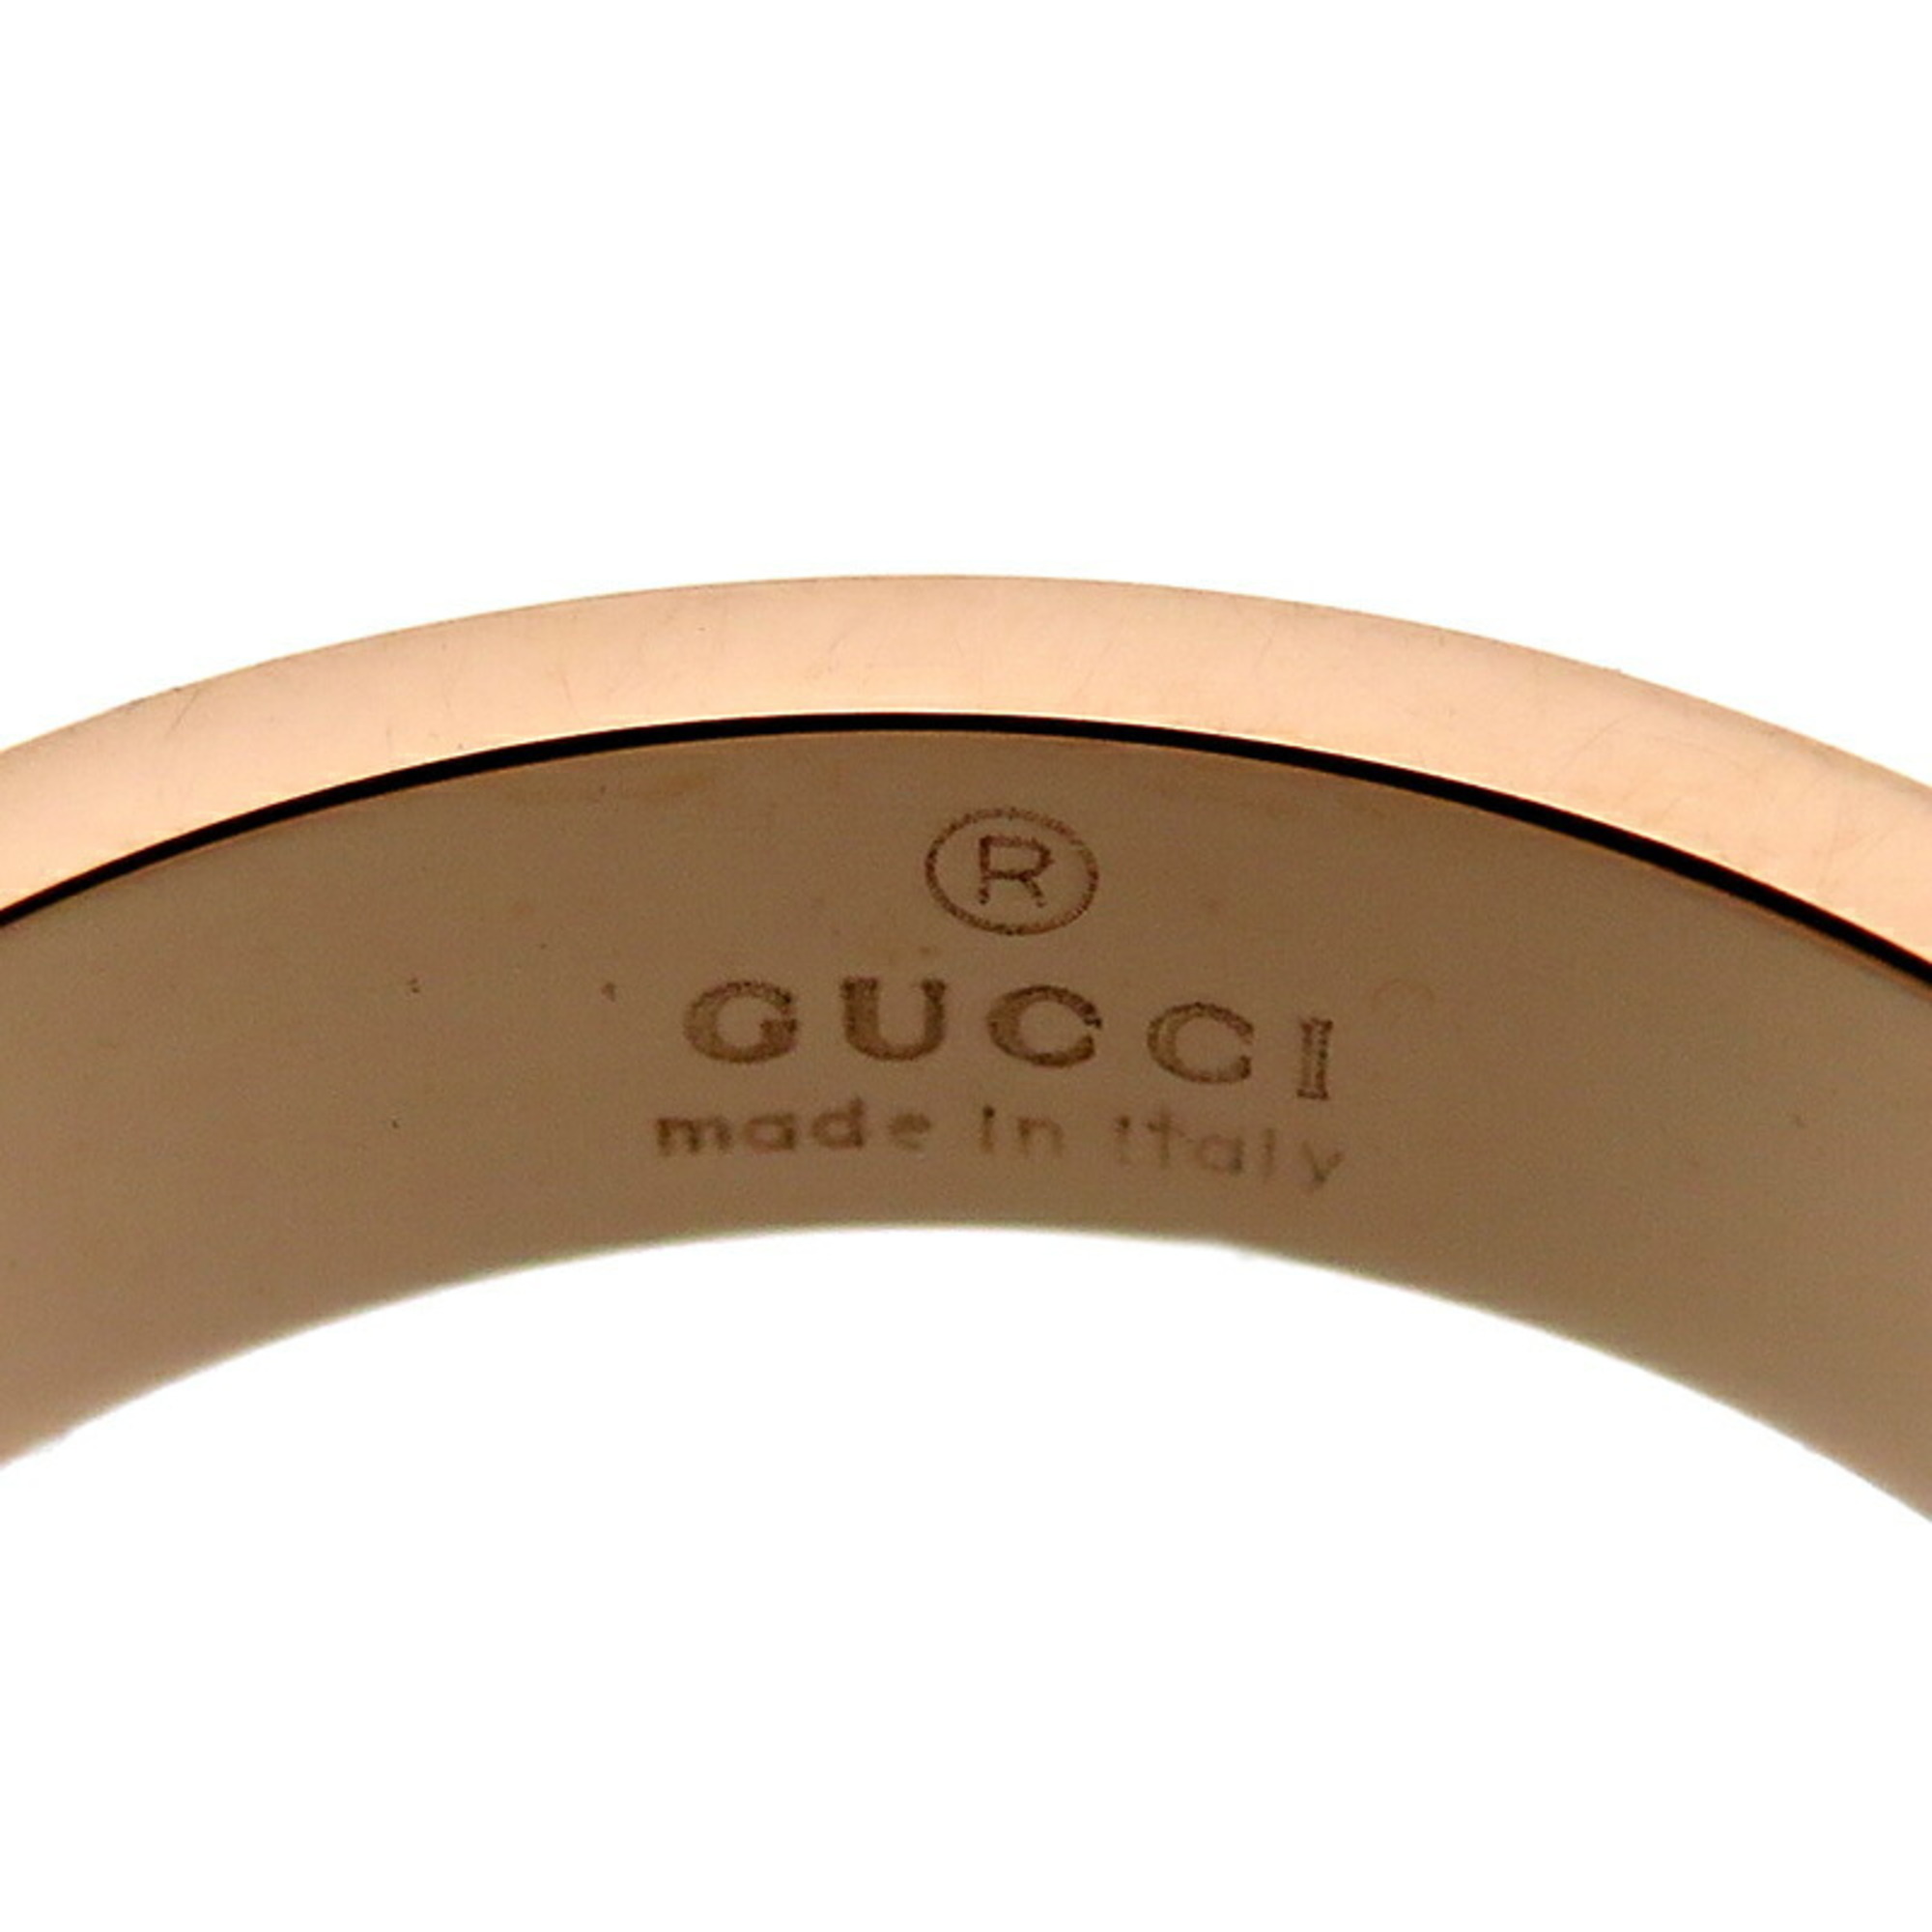 Gucci 750PG Icon Women's Ring, 750 Pink Gold, Size 8